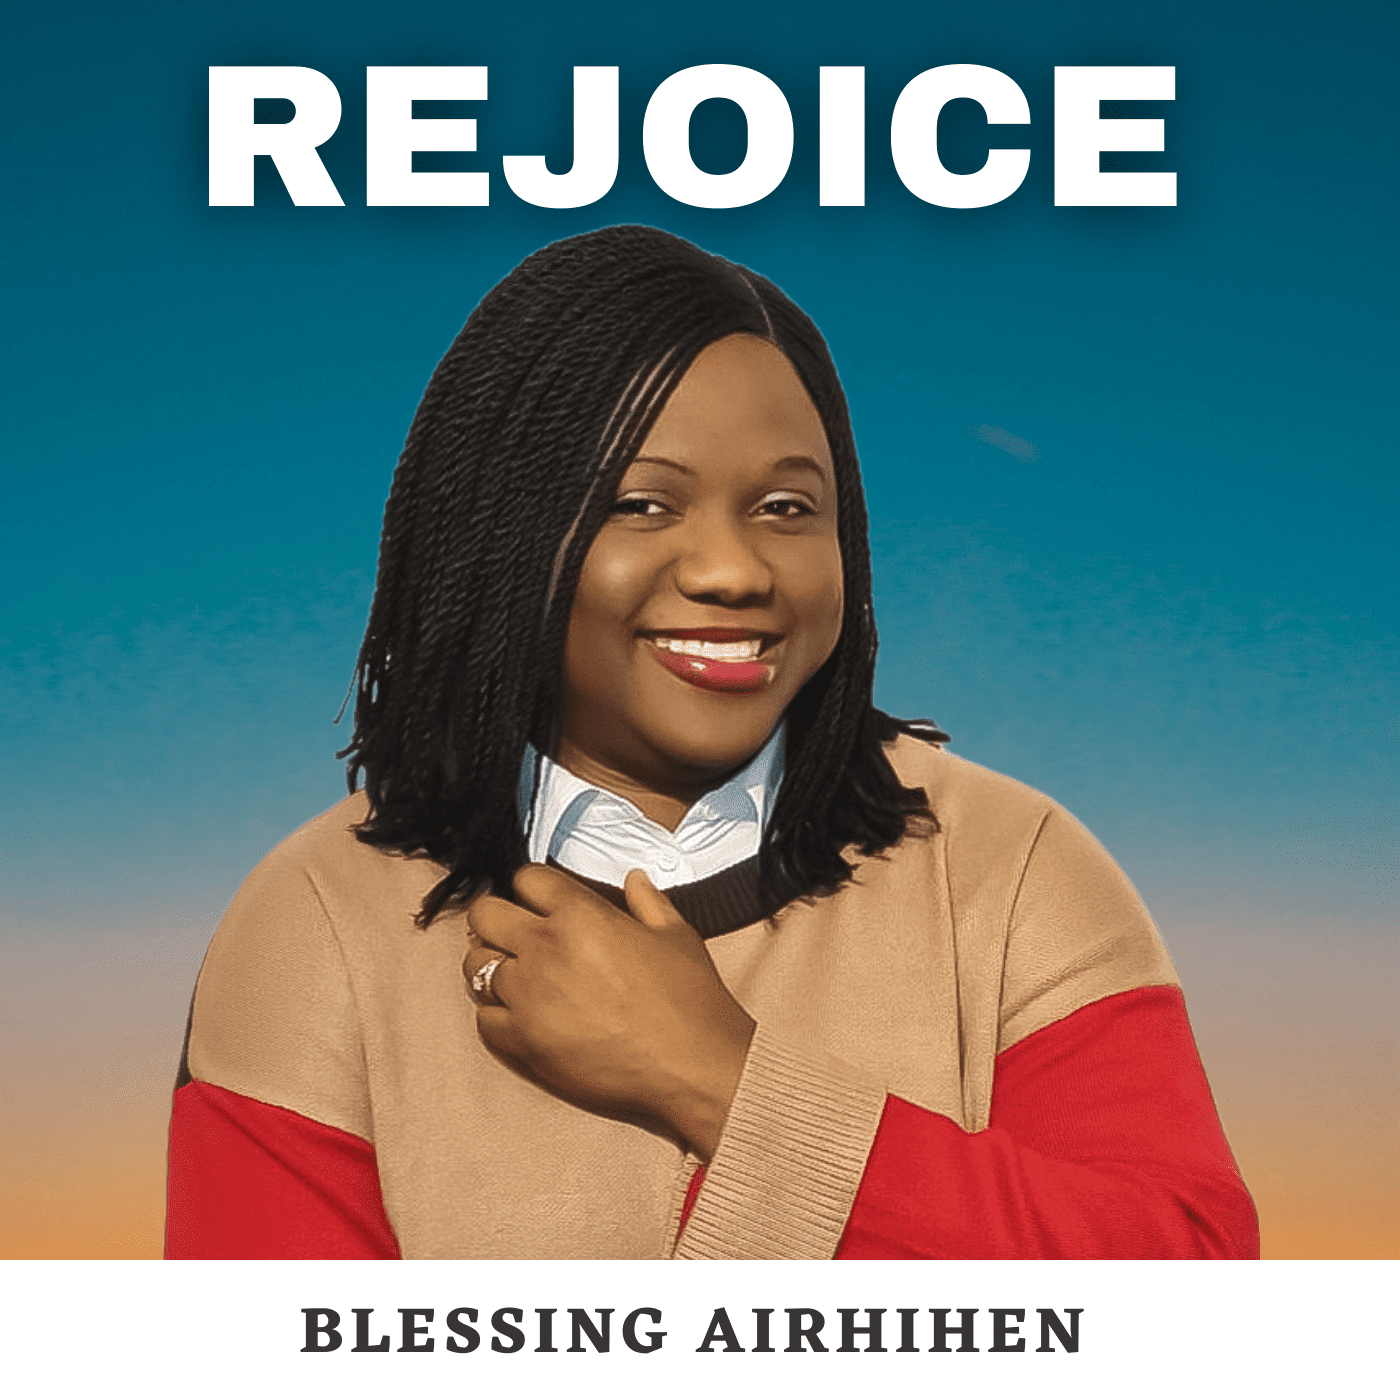 Download Mp3: Blessing Airhihen - Rejoice